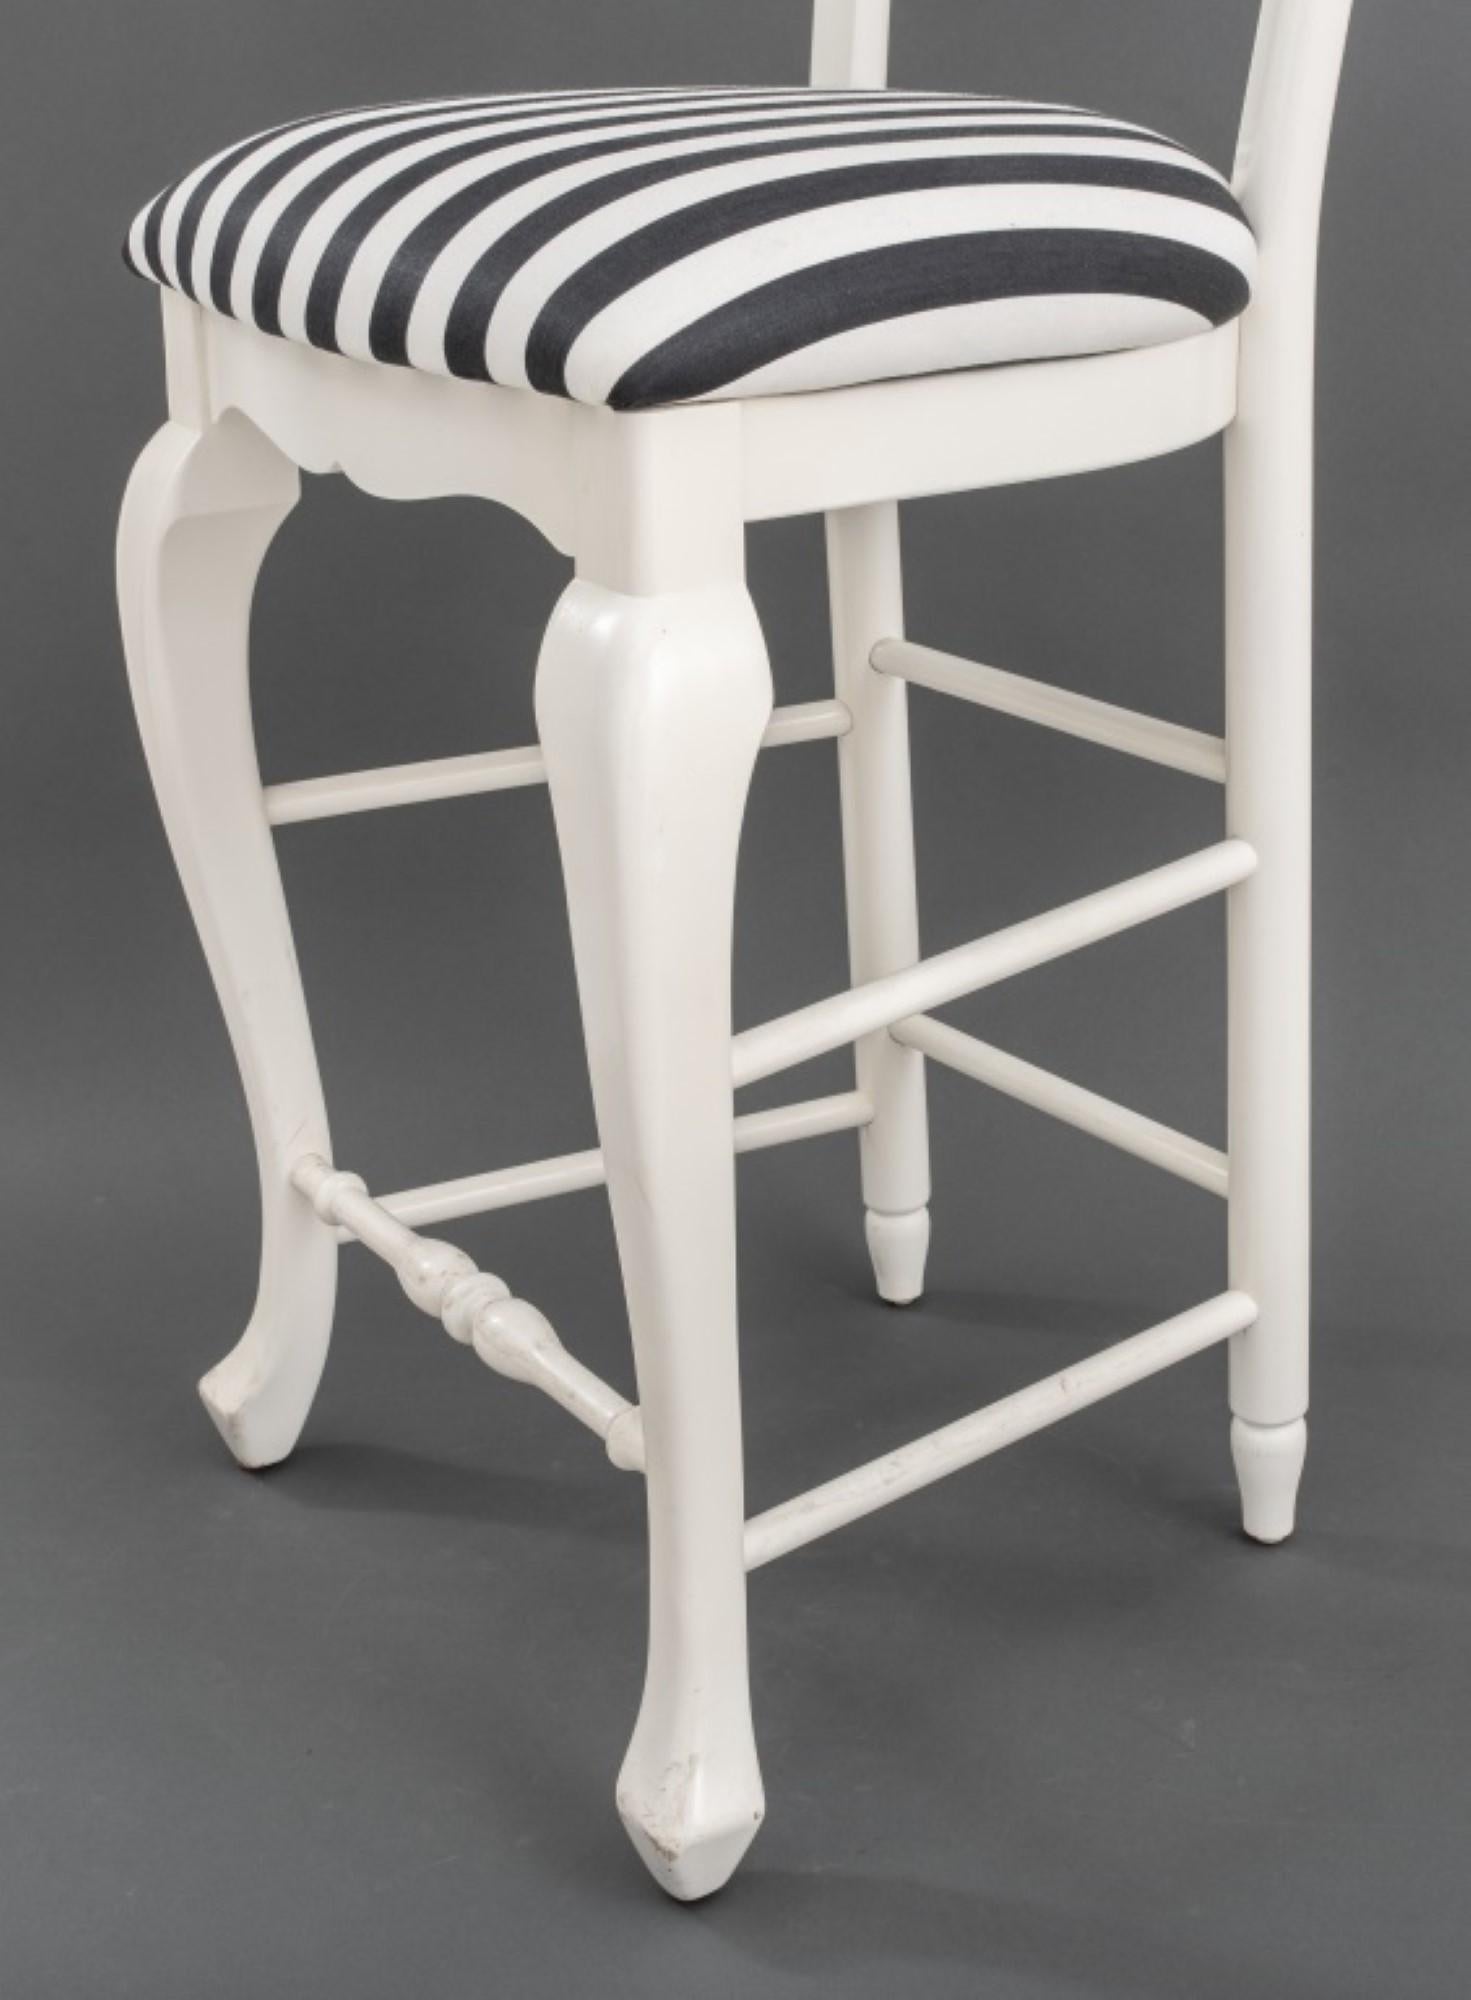 American MacKenzie Childs Freckle Fish Bar Stool For Sale